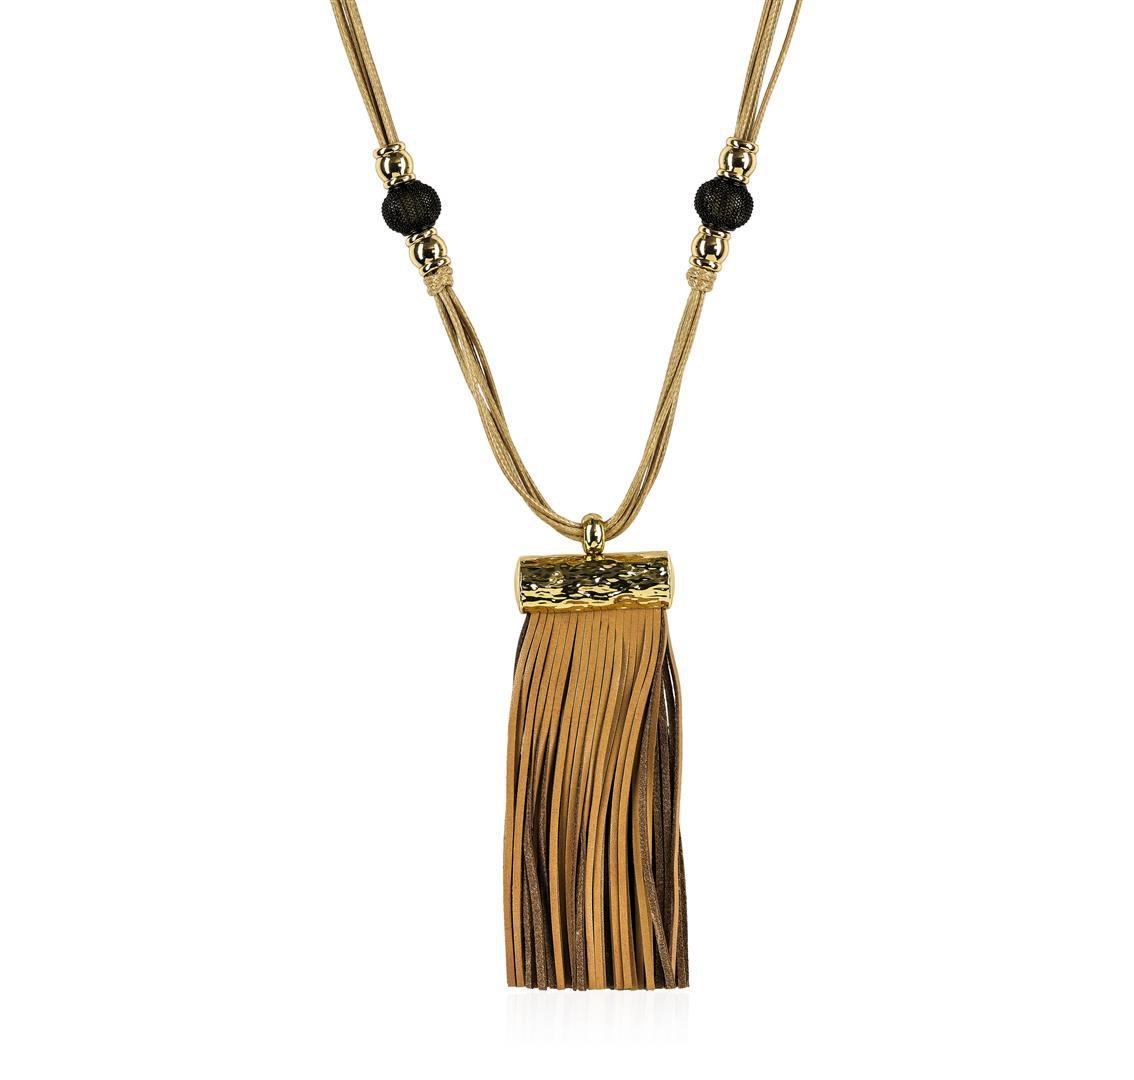 Bamboo Leather Tassel Necklace - Gold Plated